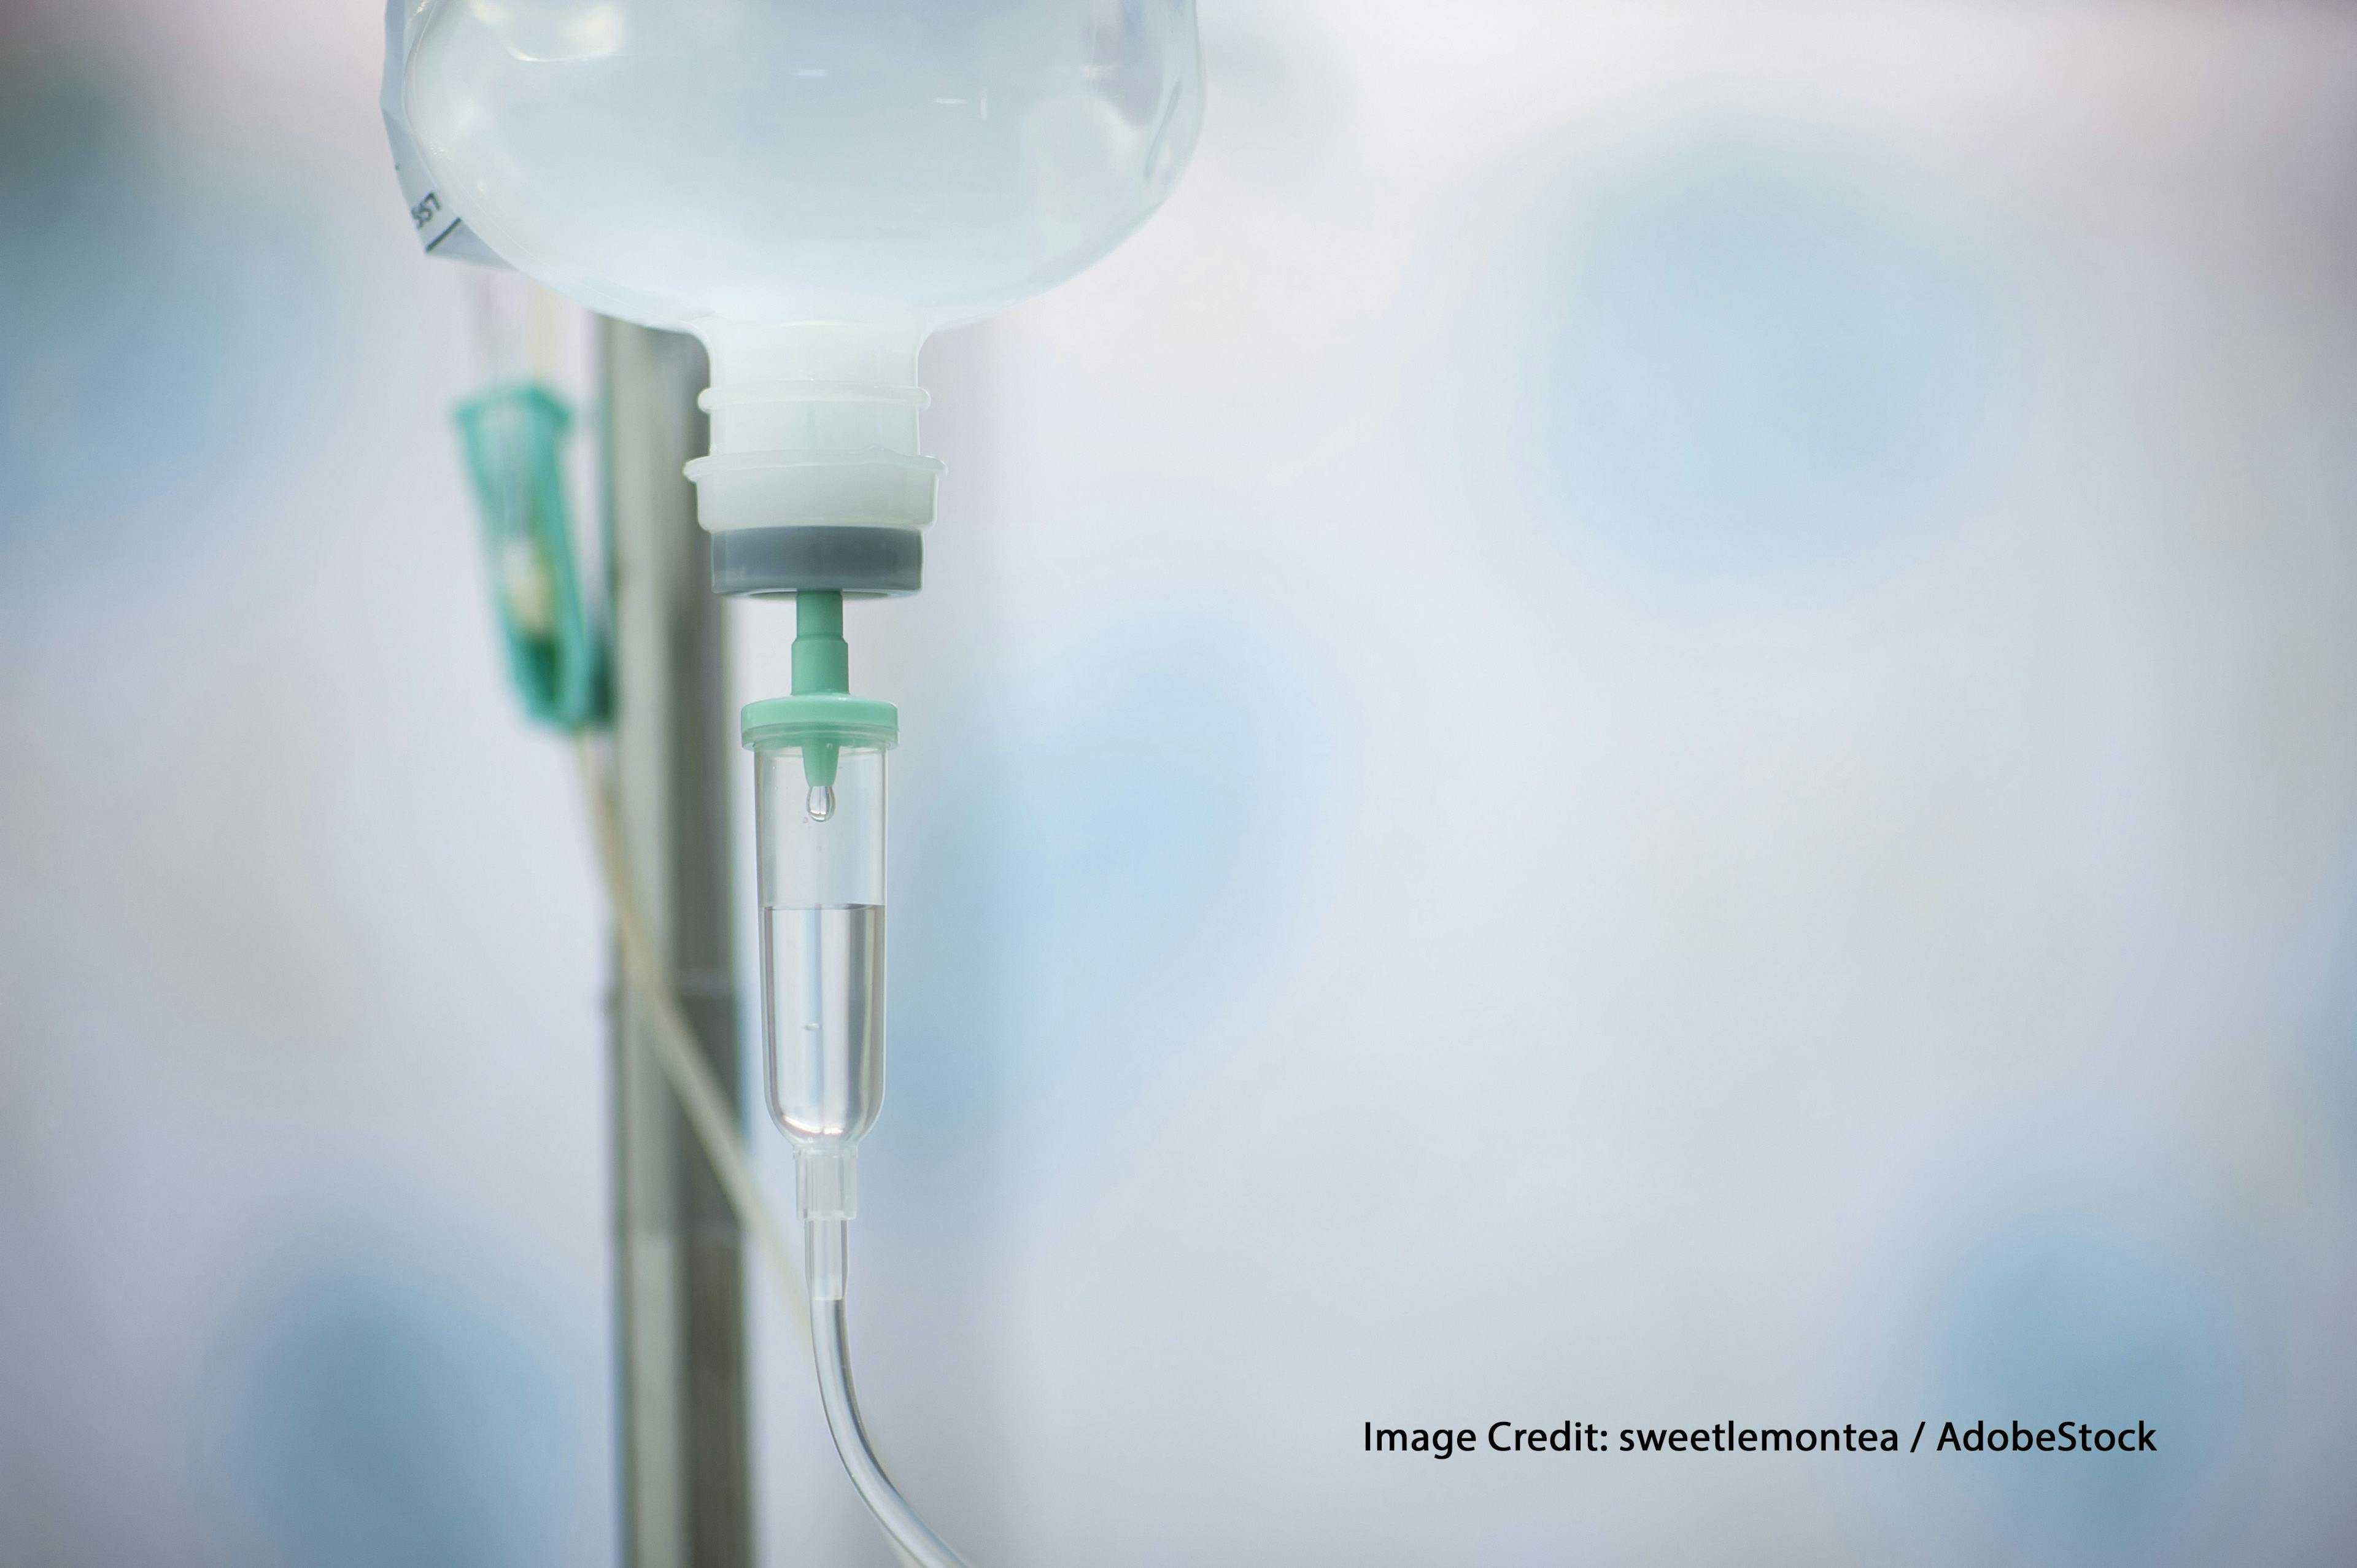 Does Chemotherapy Increase the Risks of Myelodysplastic Syndrome and Acute Myeloid Leukemia?